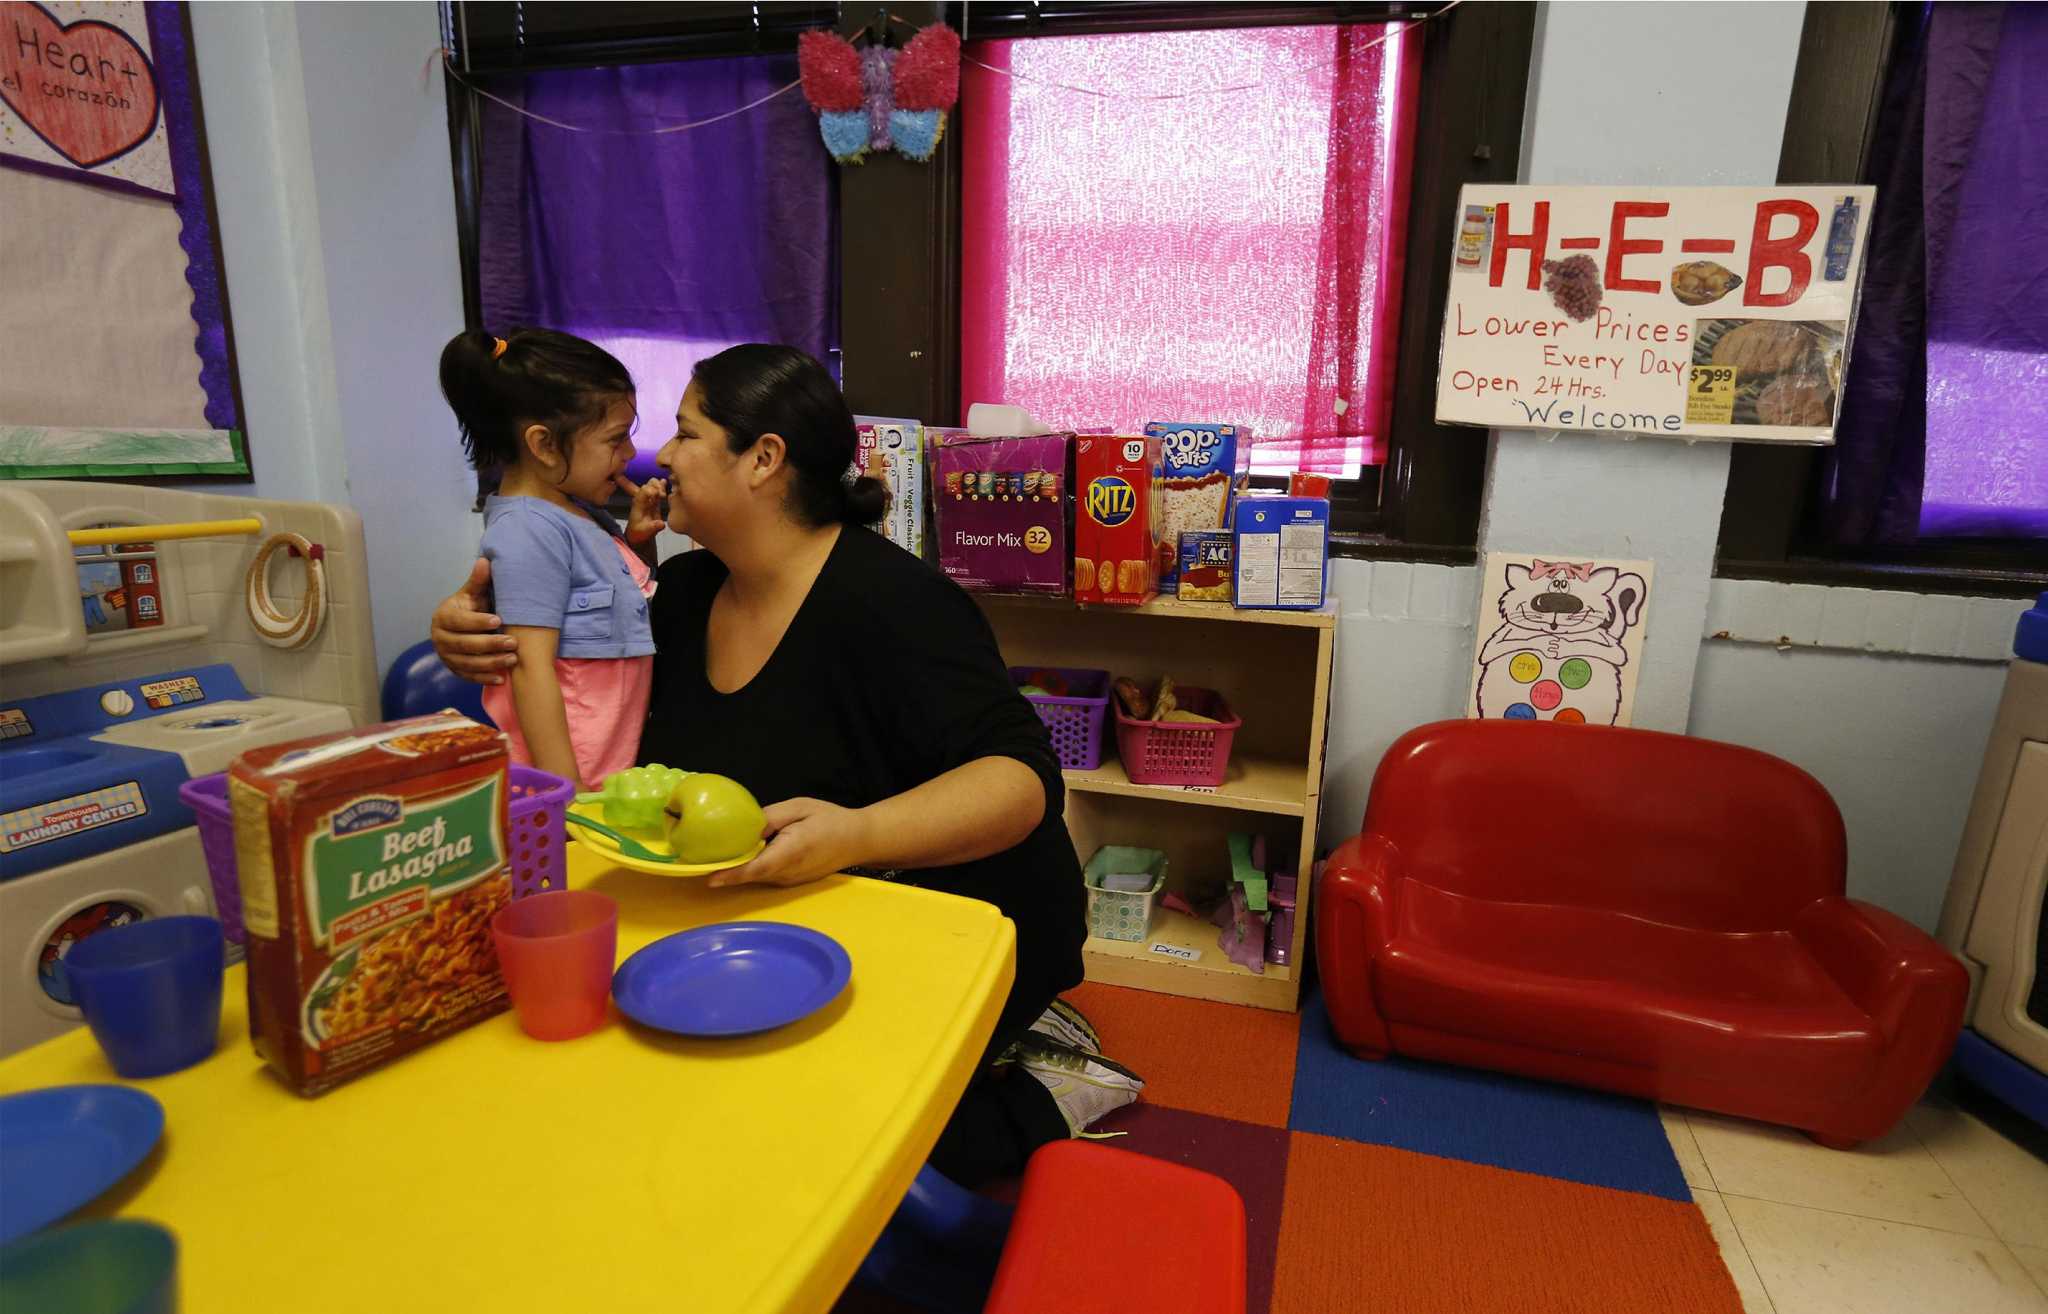 Child care programs for the working poor fall short - San Antonio Express-News (subscription)